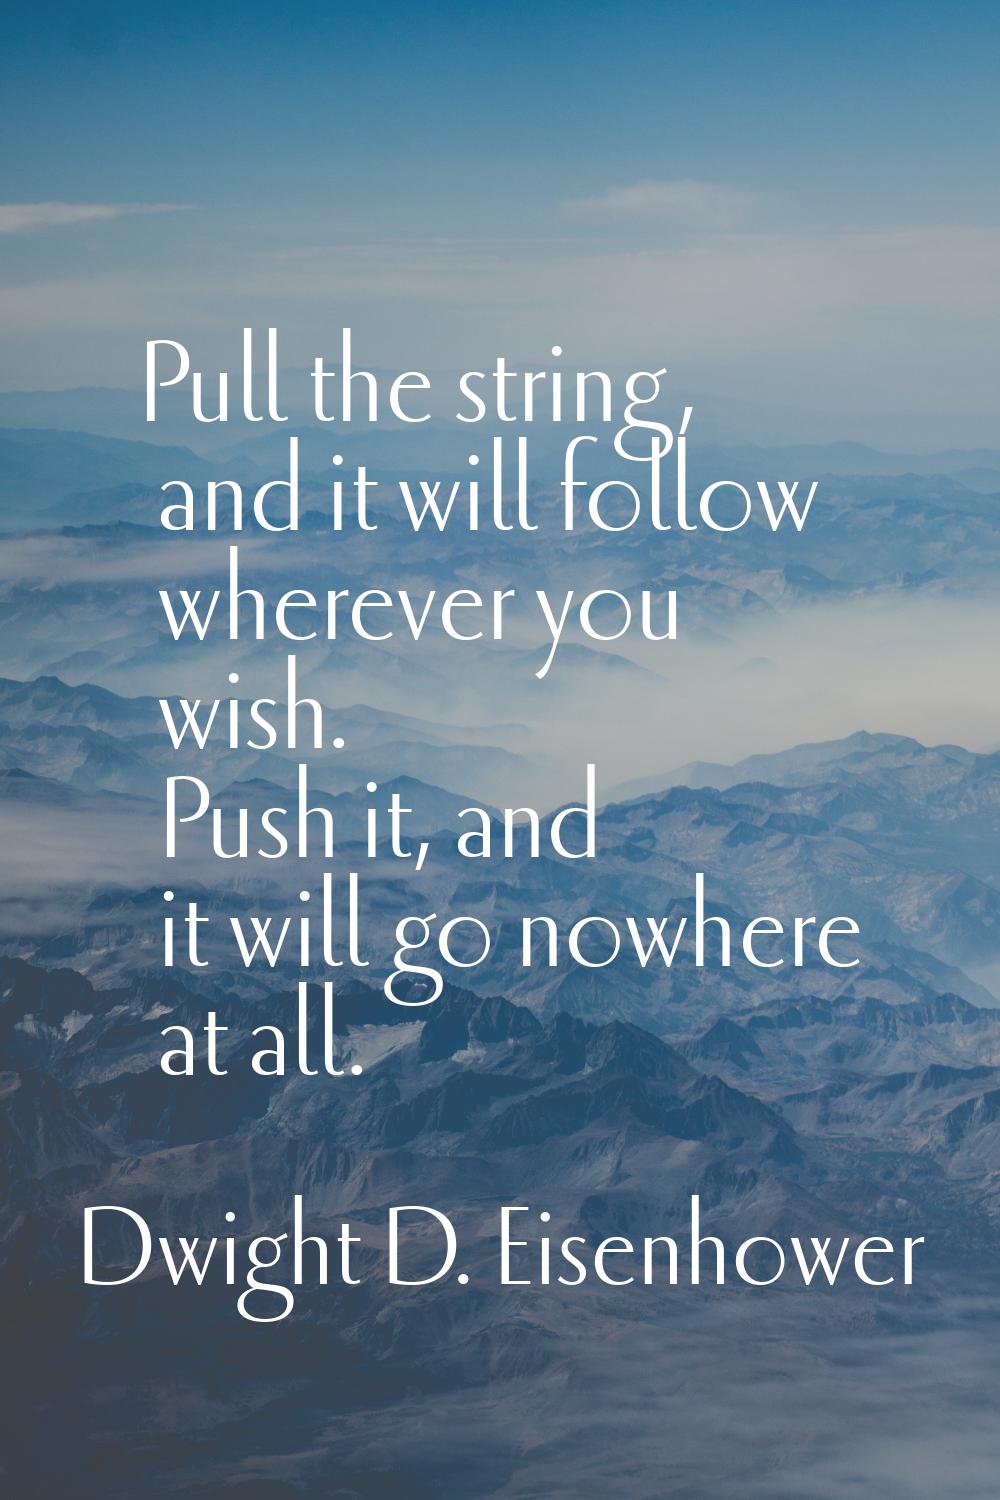 Pull the string, and it will follow wherever you wish. Push it, and it will go nowhere at all.